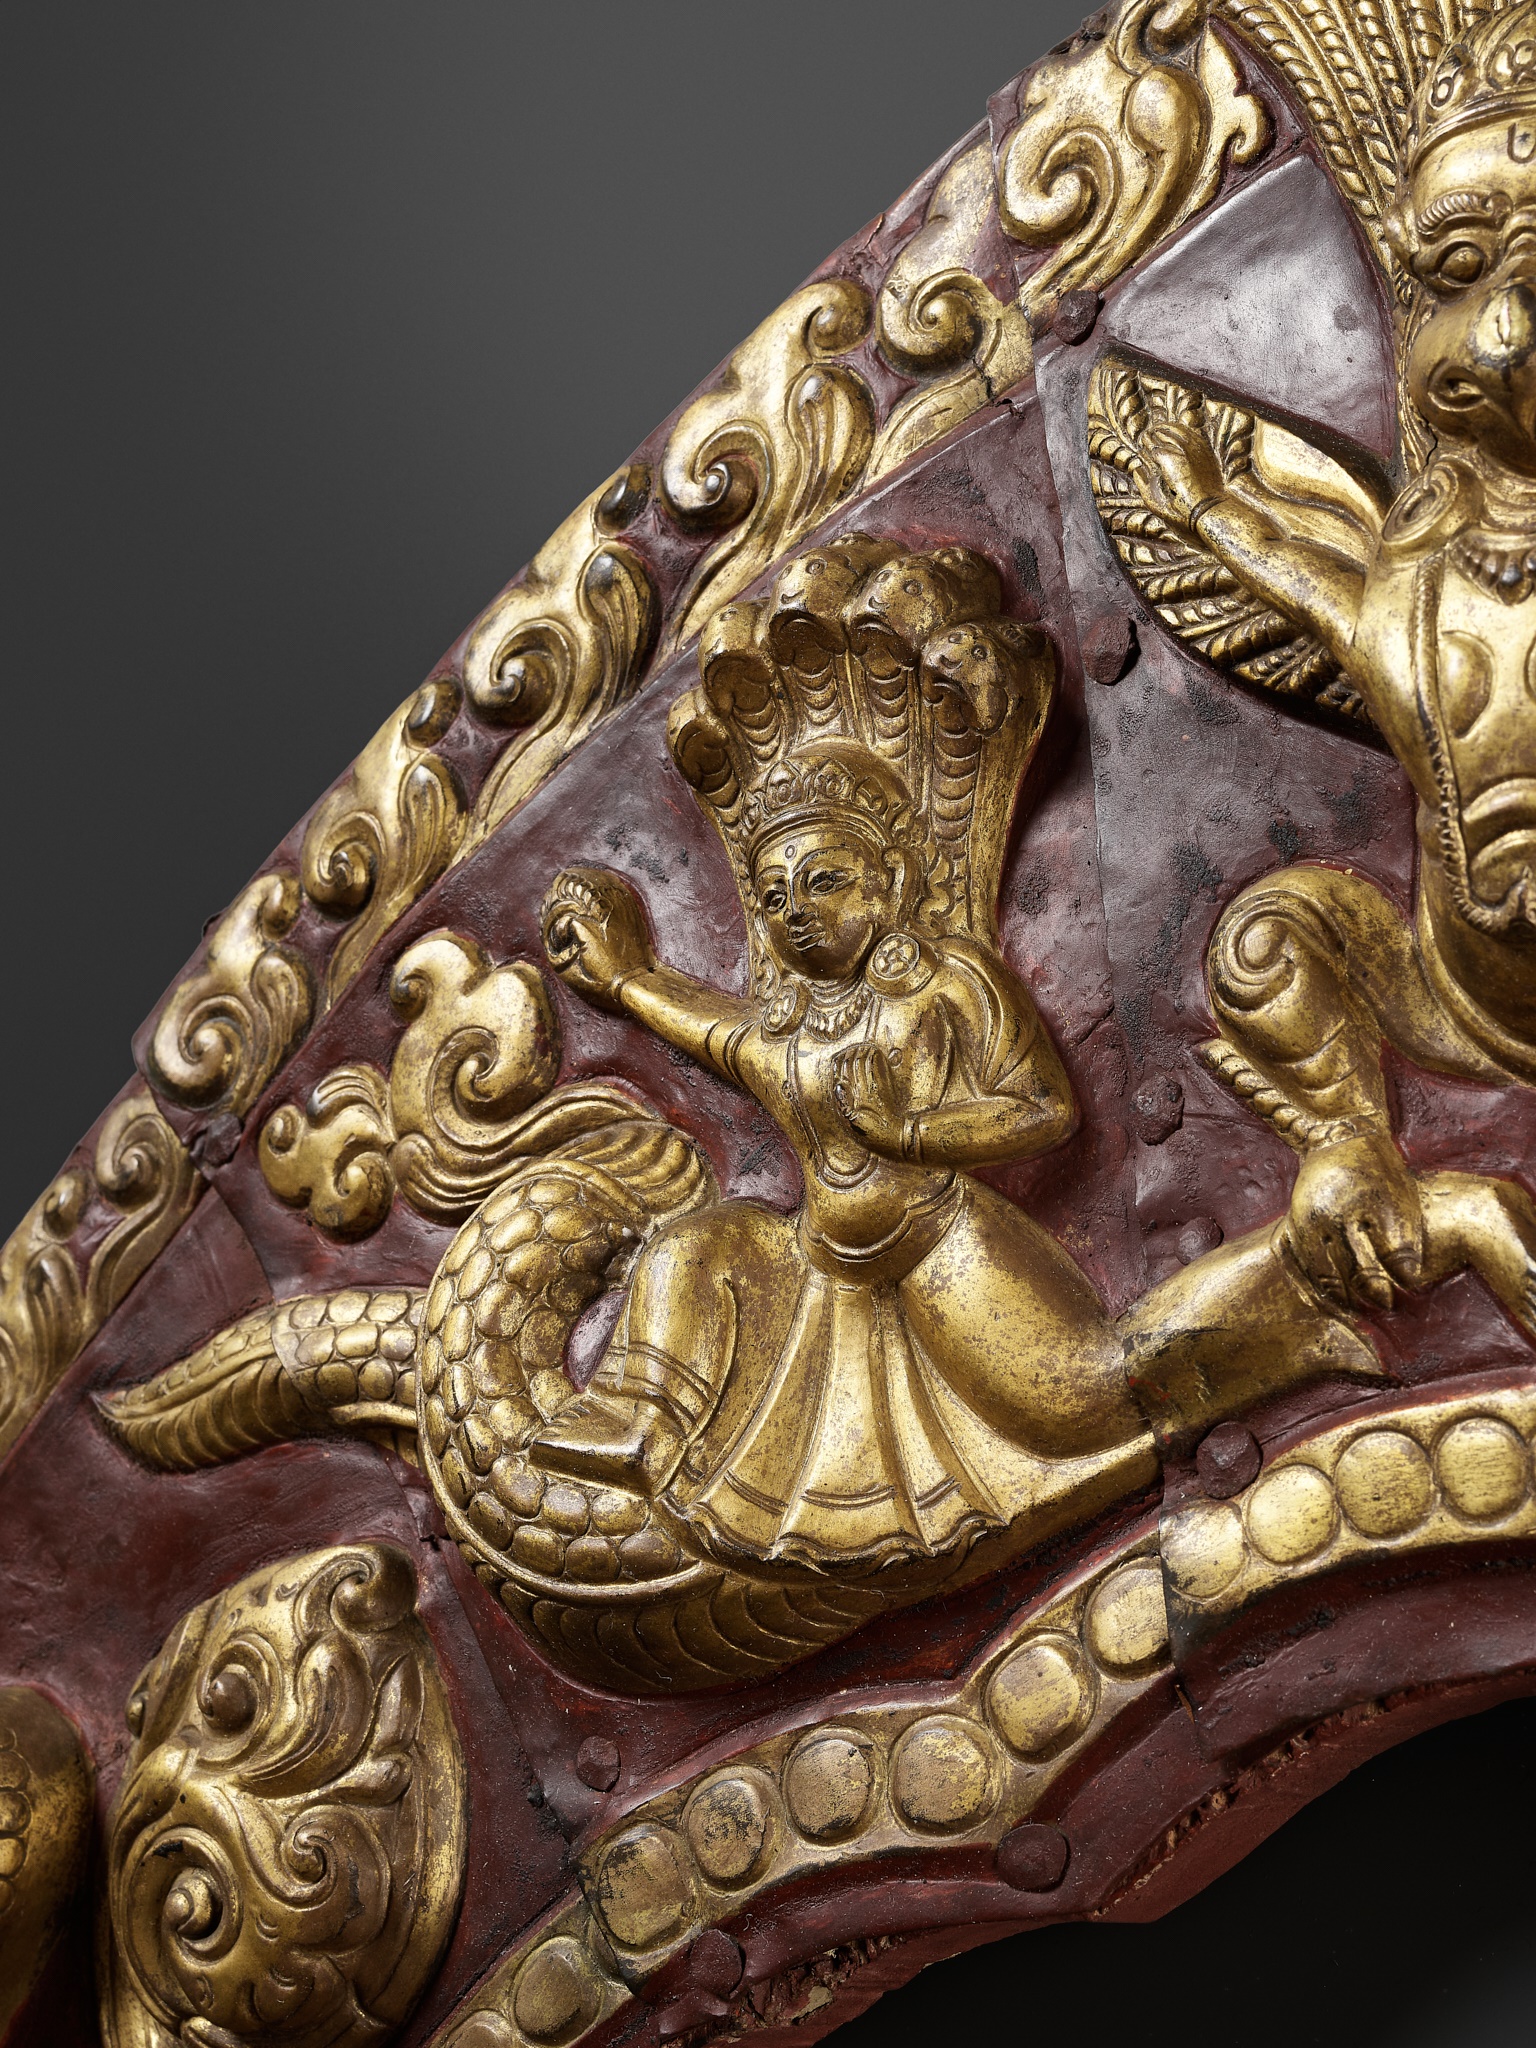 A LARGE GILT AND LACQUERED COPPER REPOUSSE TORANA, NEPAL, 17TH-18TH CENTURY - Image 6 of 9